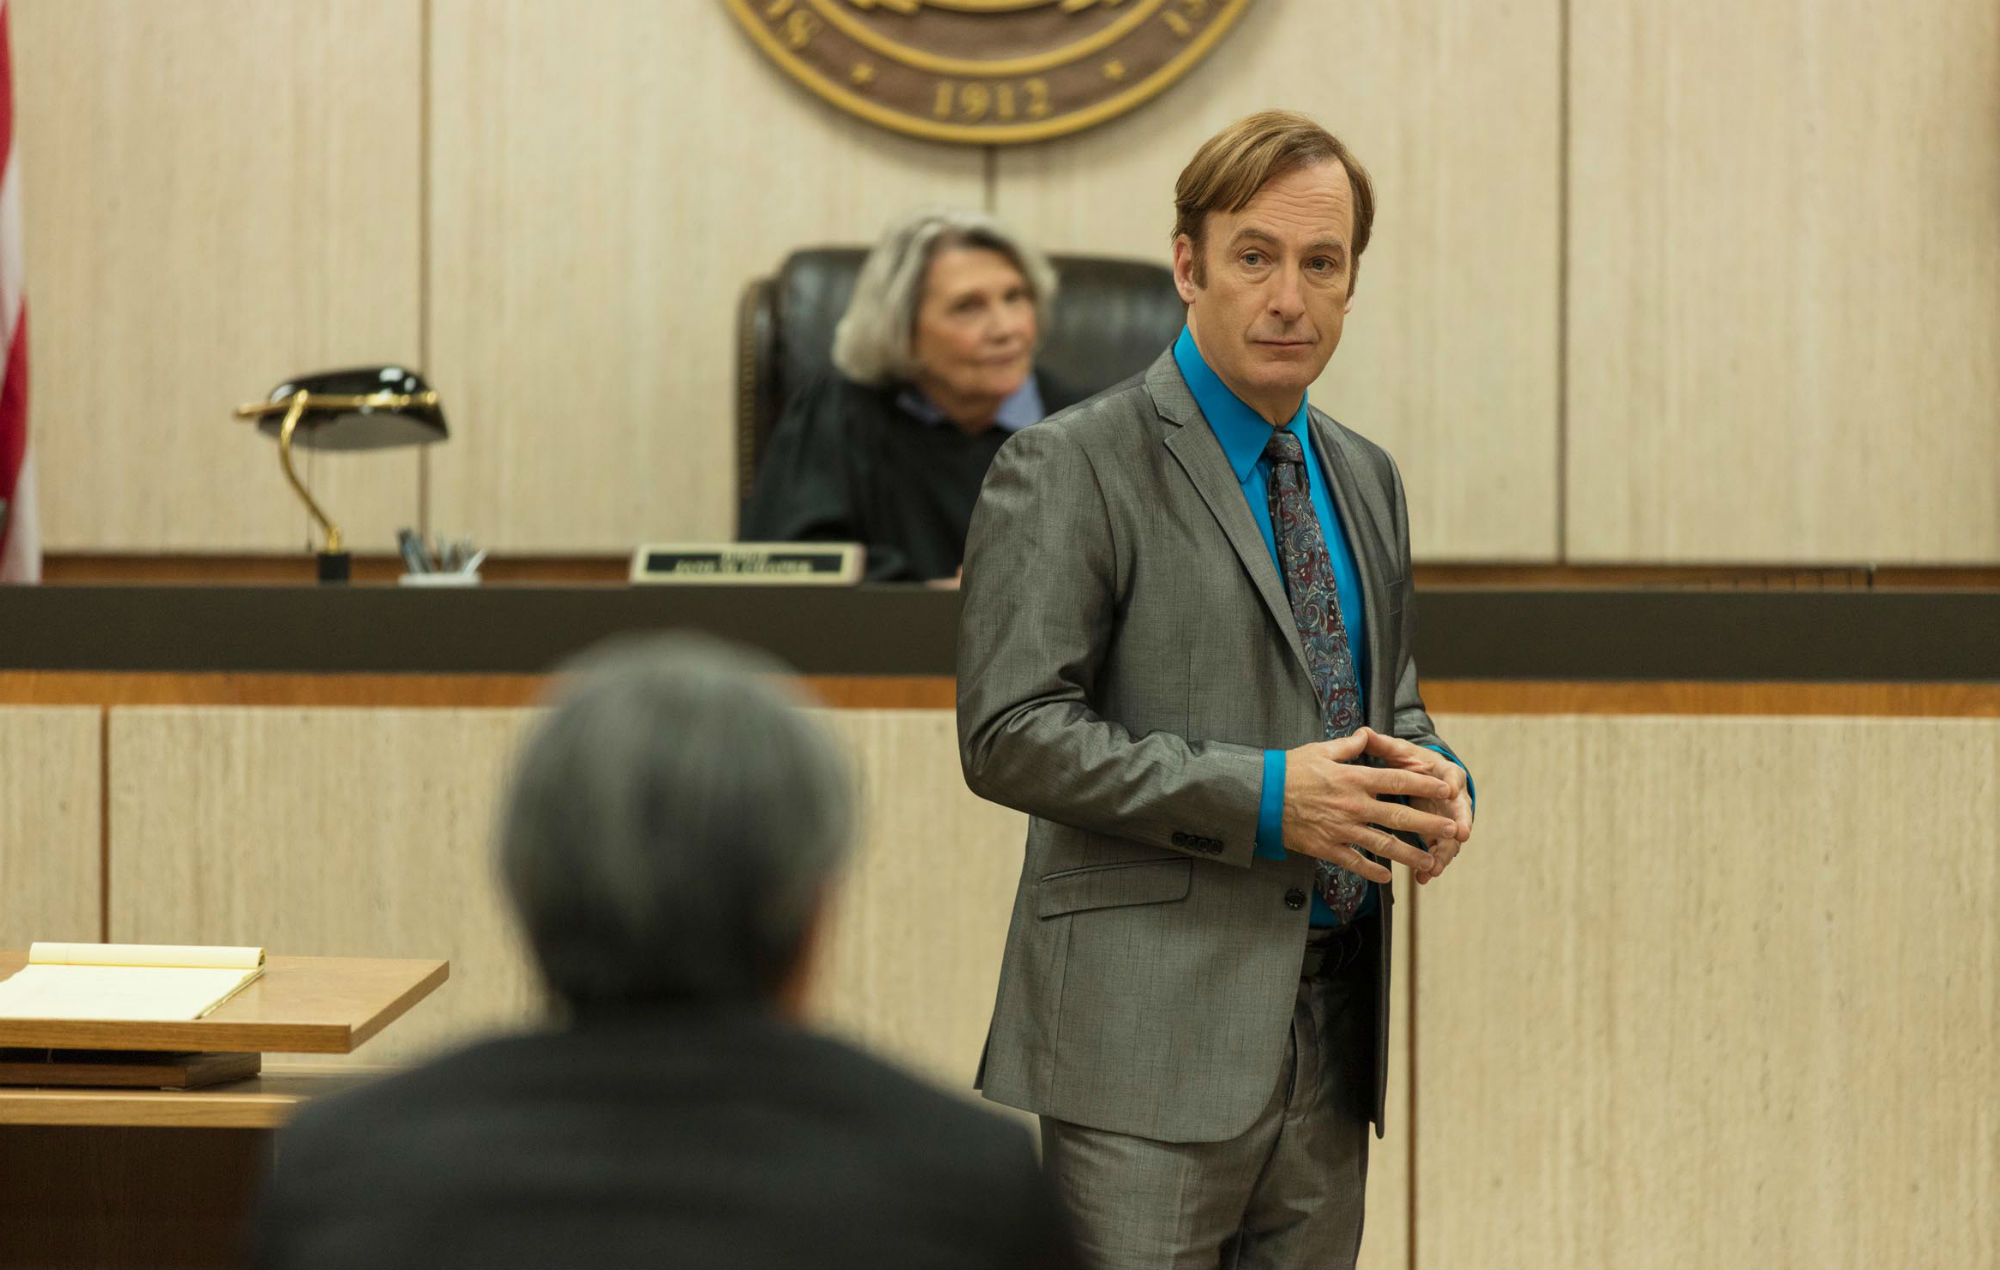 'Better Call Saul' season 6 will "change the way we see 'Breaking Bad' forever"